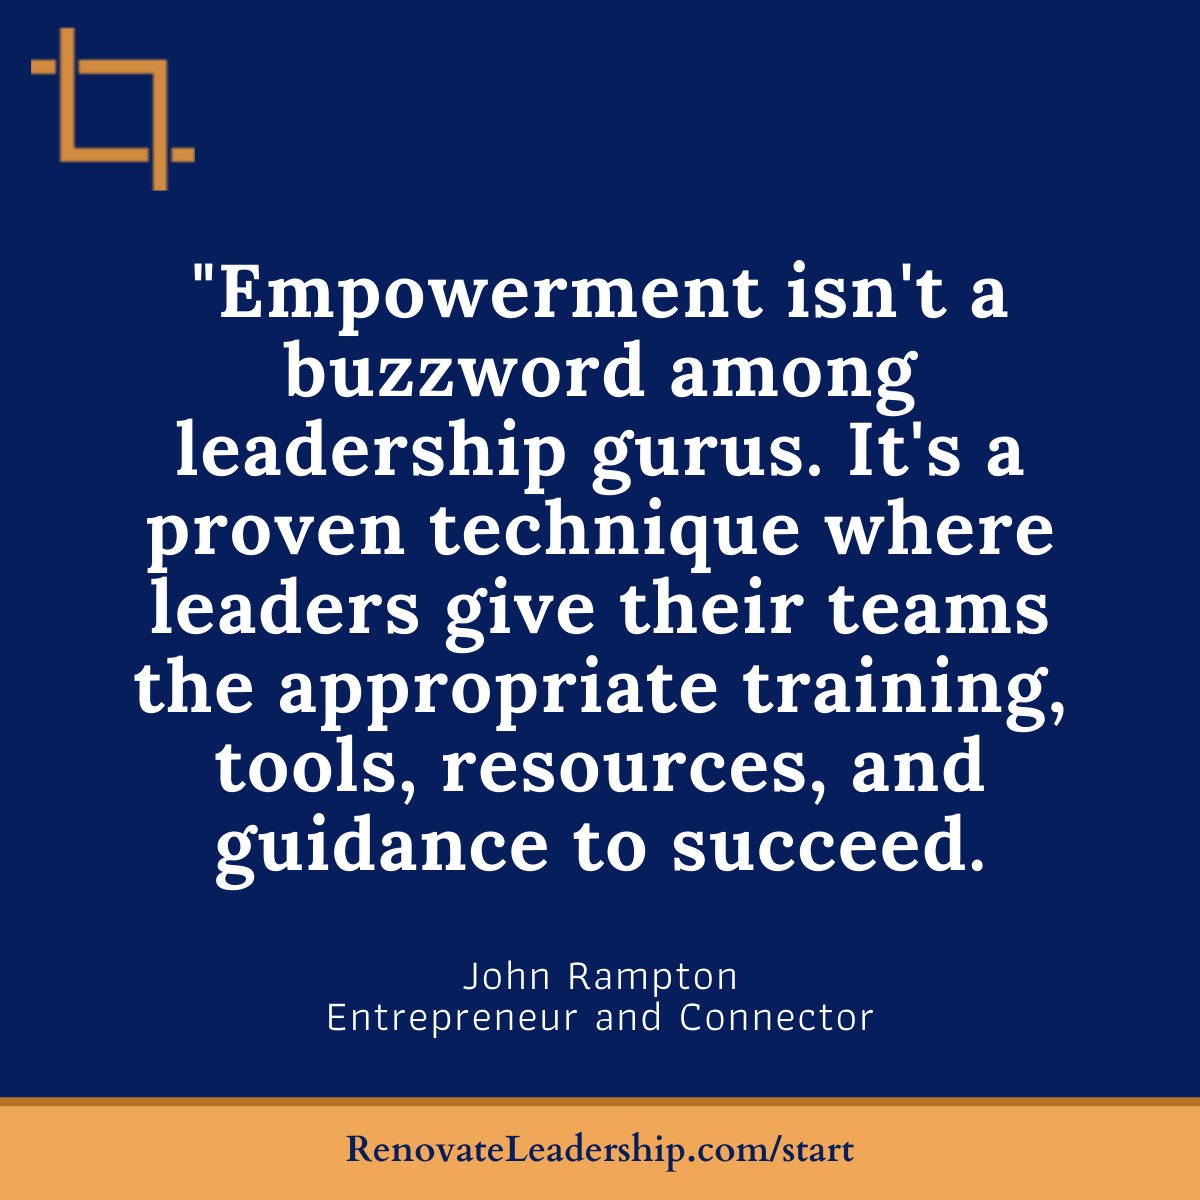 Empowerment for success 💼 Uncover John Rampton's perspective on empowering teams with the right tools, training, and guidance. Power up! #EmployeeEmpowerment #RenovateLeadership #SystemAndSoul